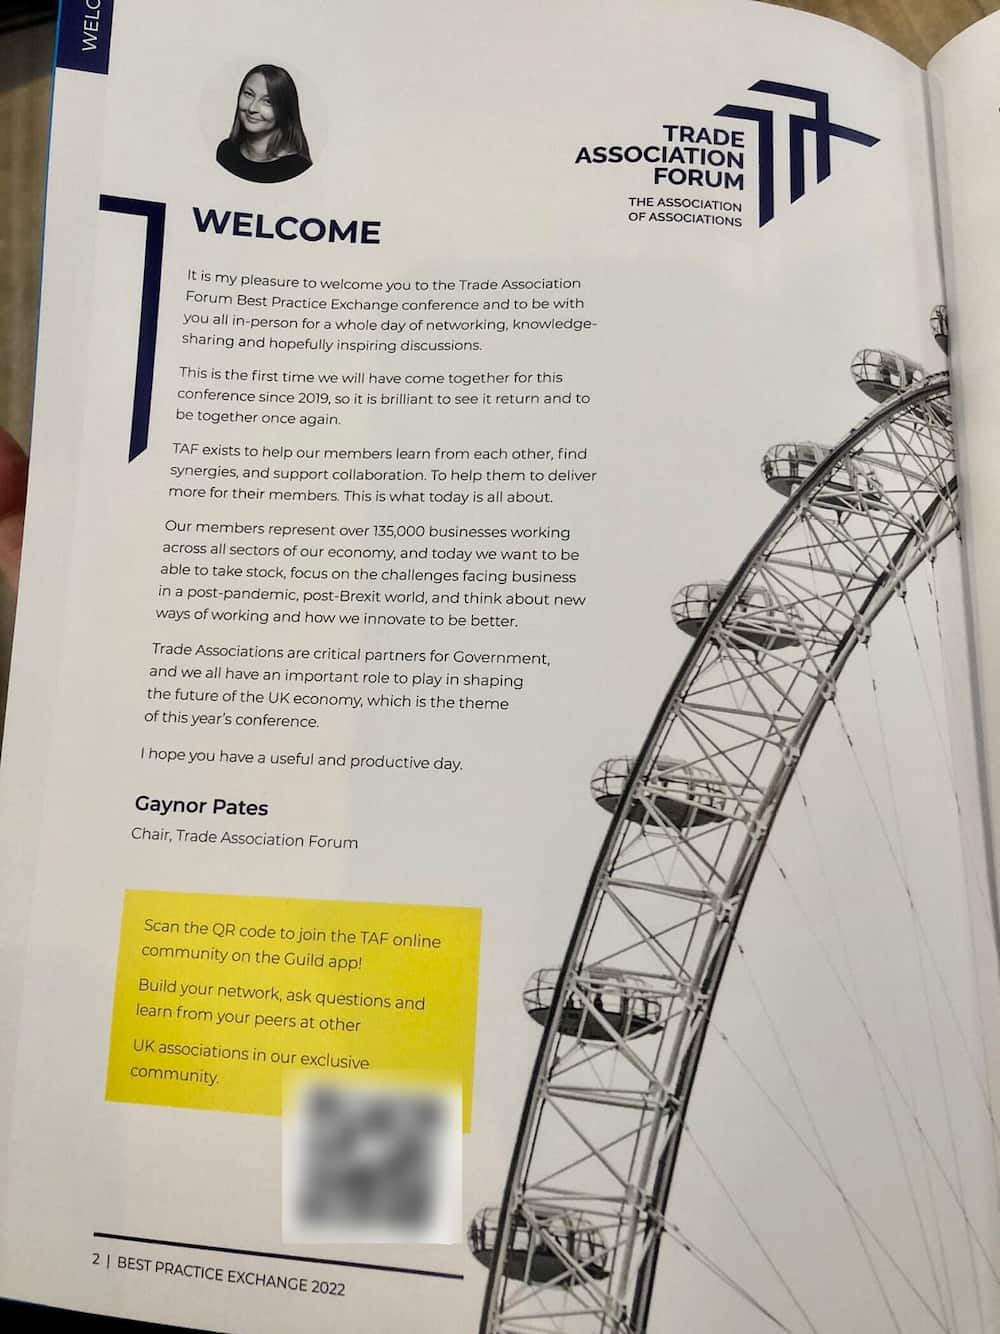 Acquisition tactic - The Trade Association Forum inviting members to join their online community with a QR code in an event programme